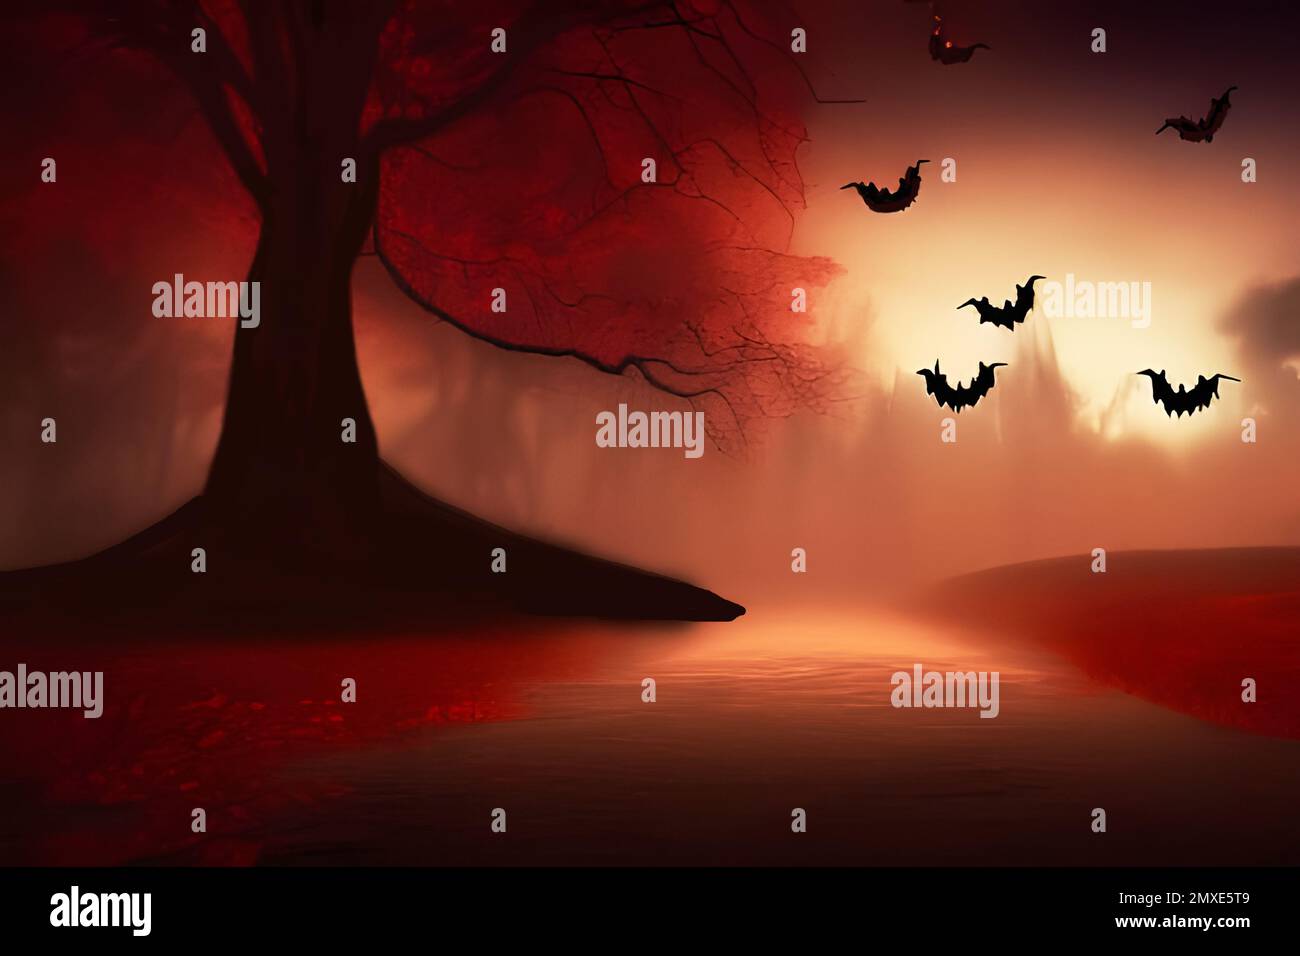 Halloween landscape with silhouettes of tree and bats. Stock Photo